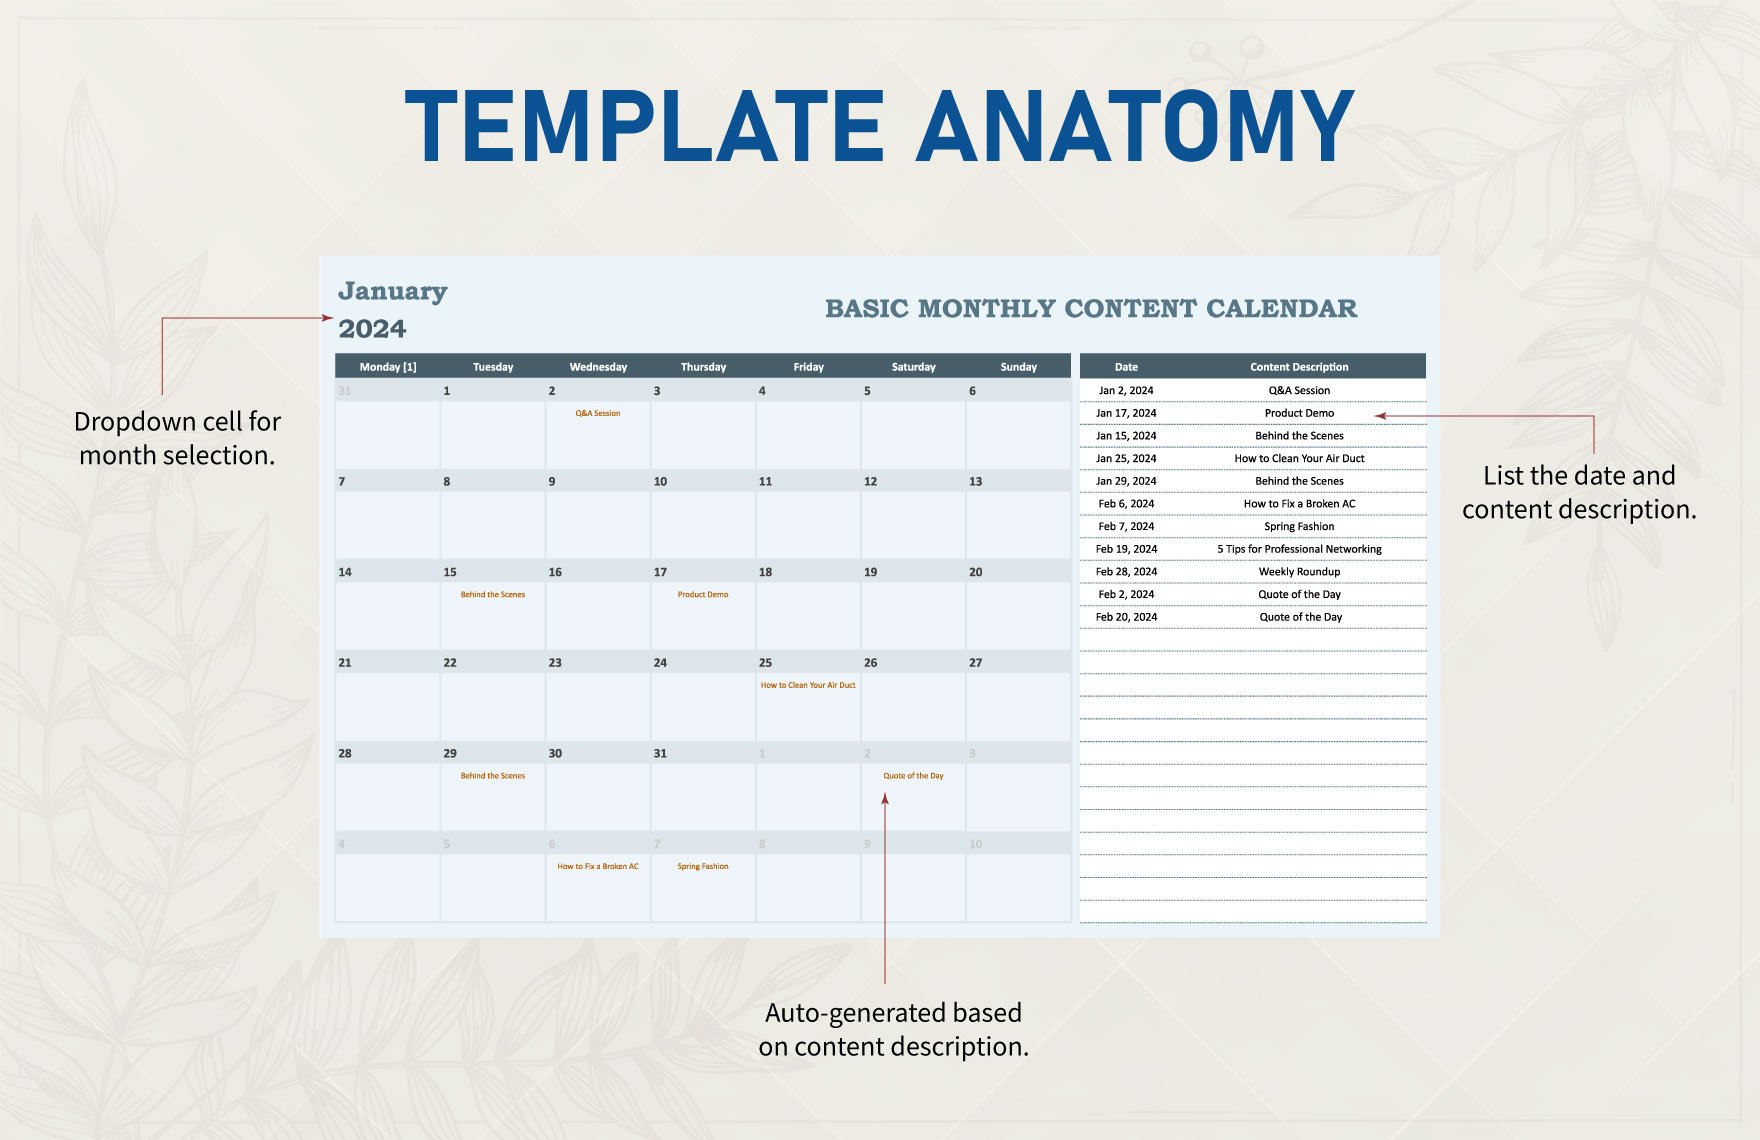 Basic Monthly Content Calendar Template